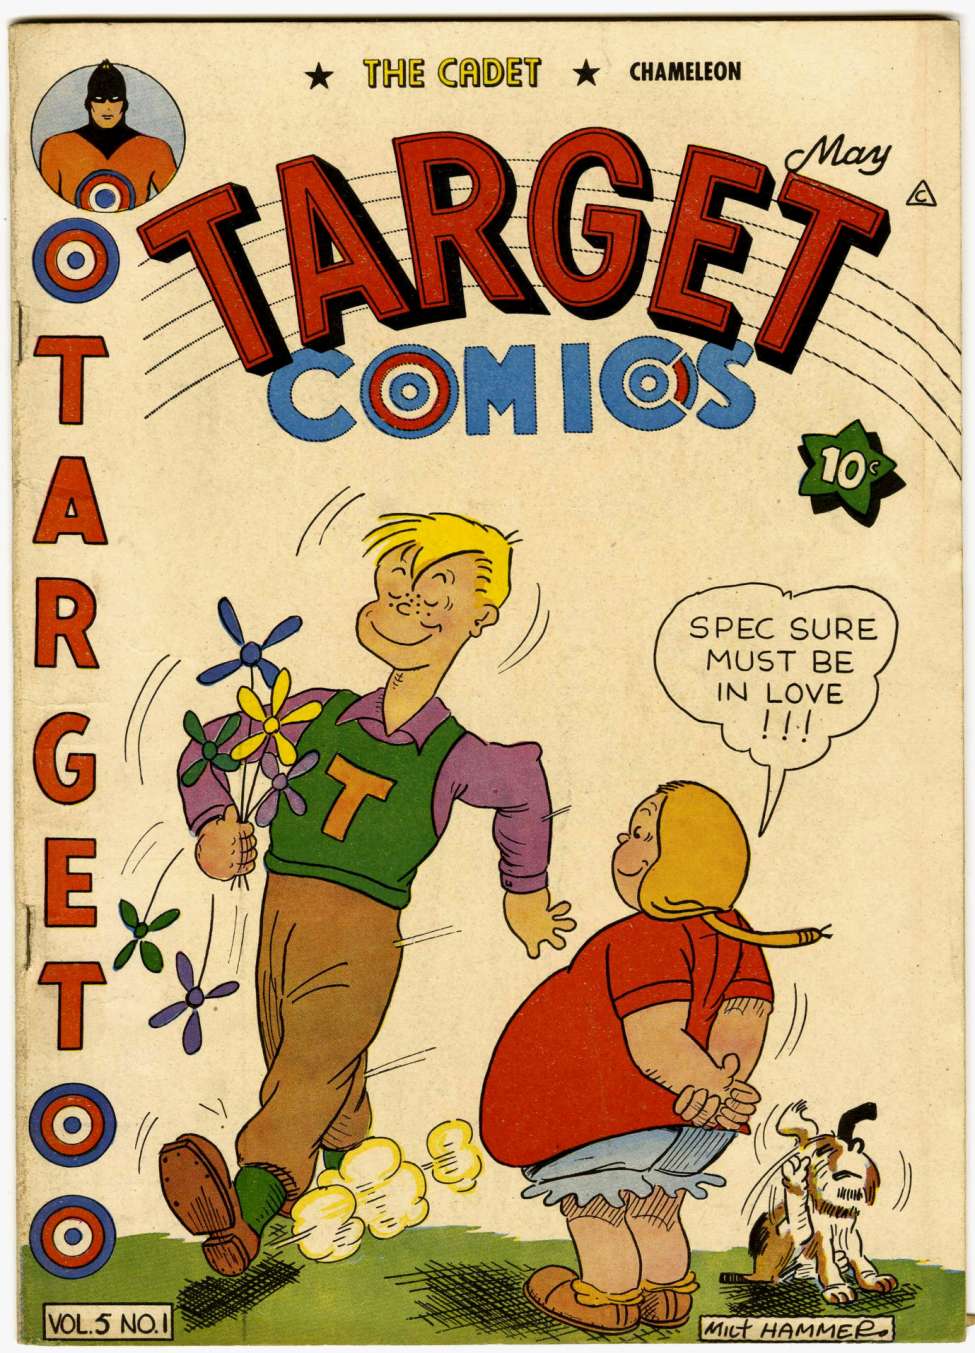 Book Cover For Target Comics v5 1